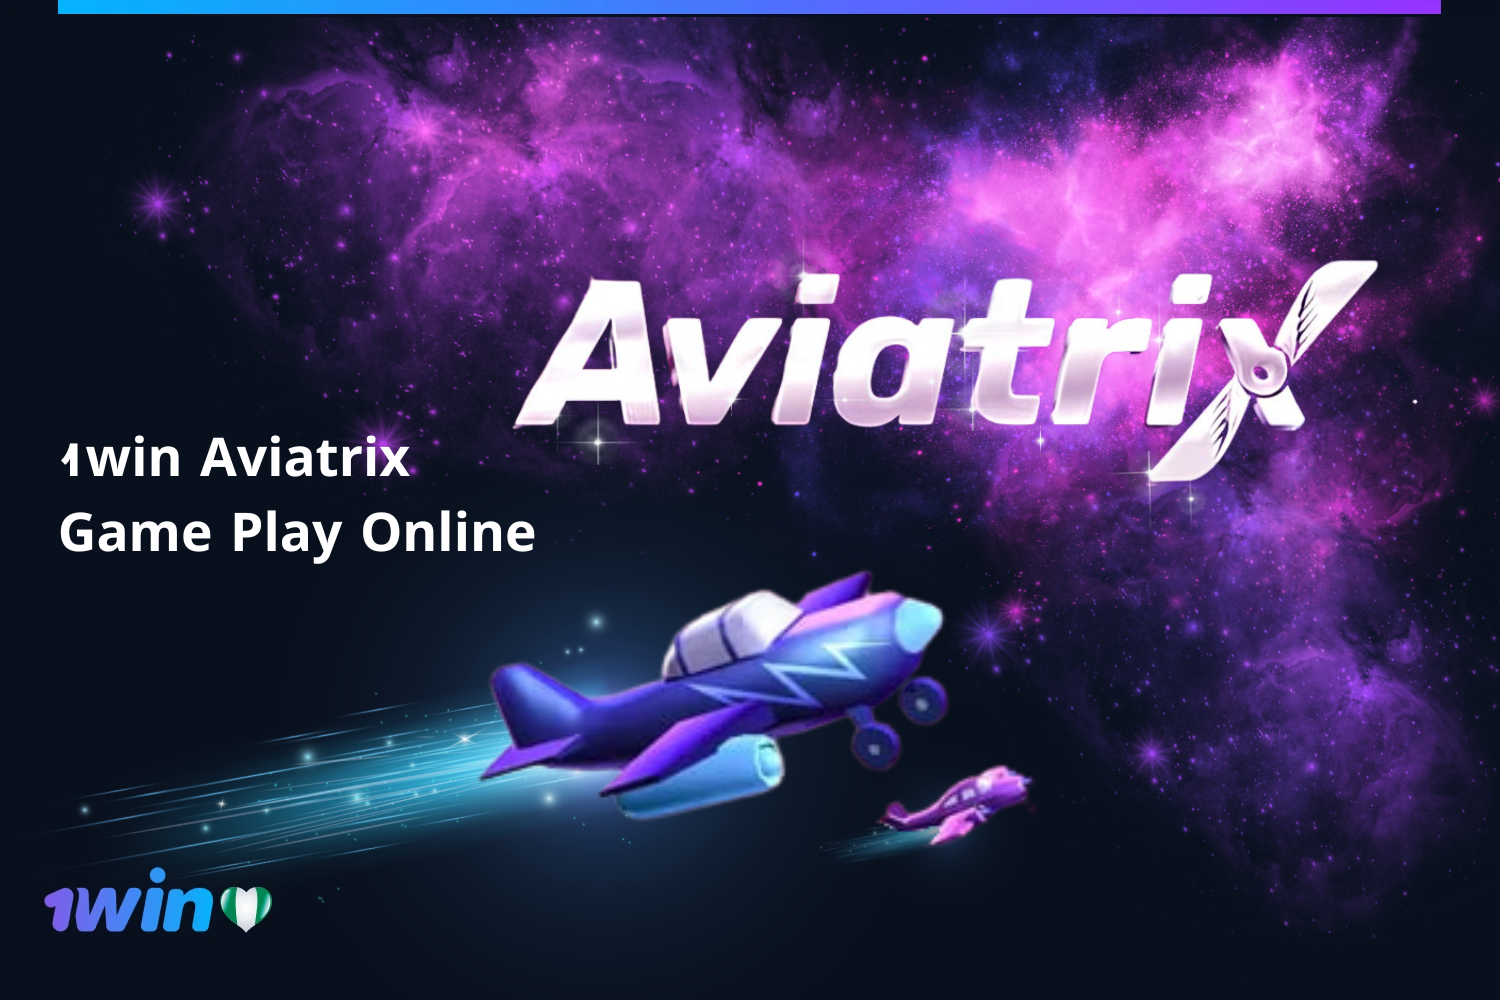 Aviatrix is a popular emergency game available at 1win for all players from Nigeria.